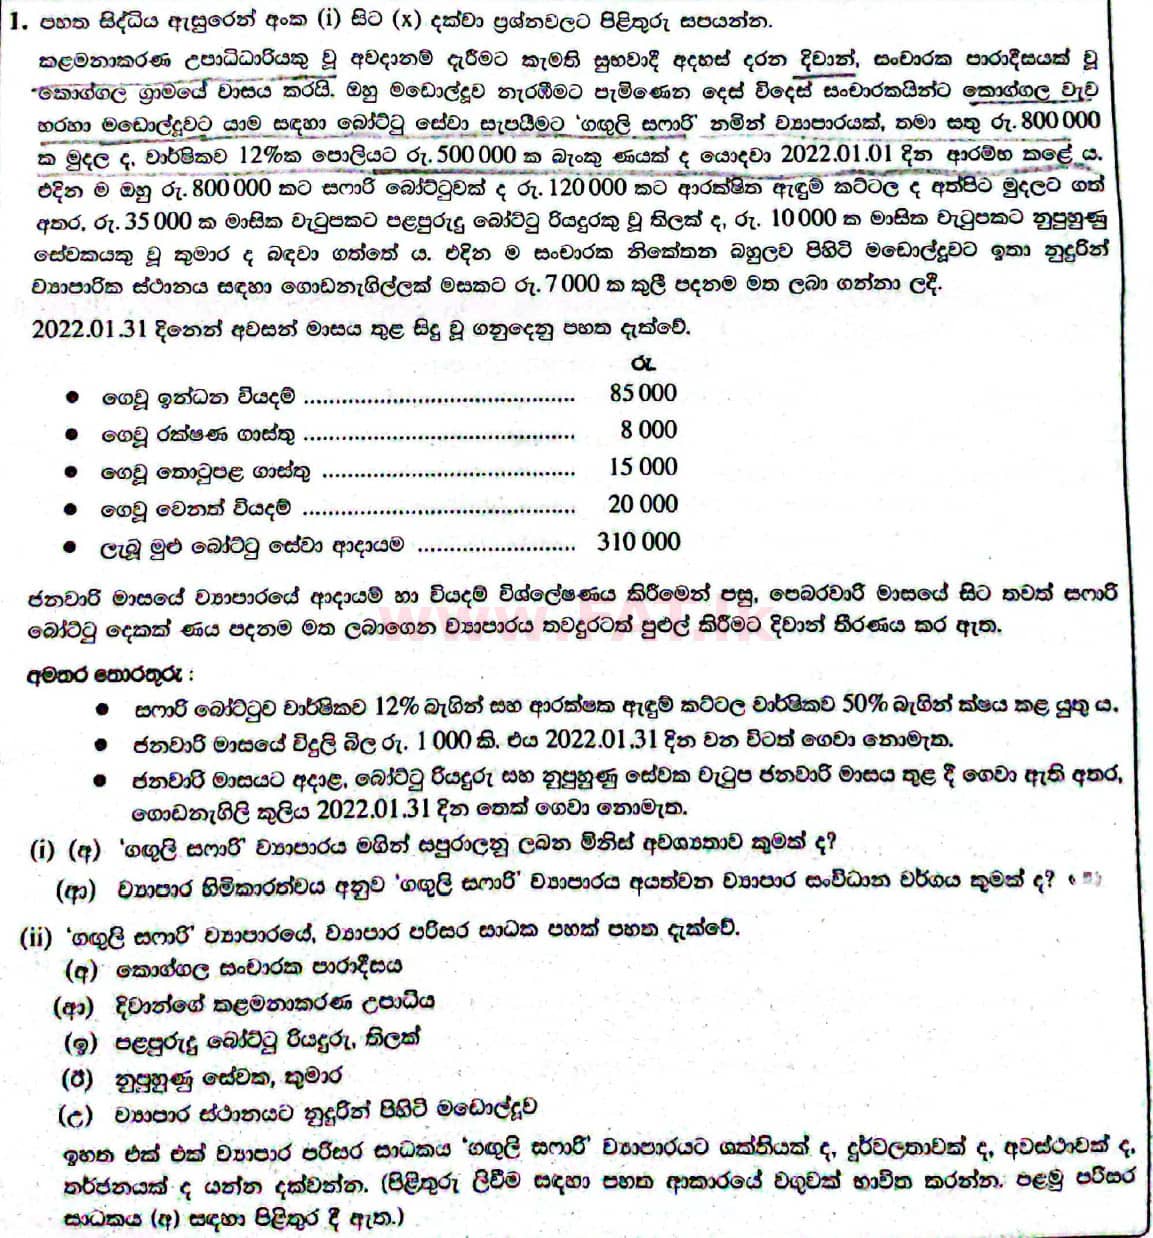 National Syllabus : Ordinary Level (O/L) Business and Accounting Studies - 2021 May - Paper II (සිංහල Medium) 1 1